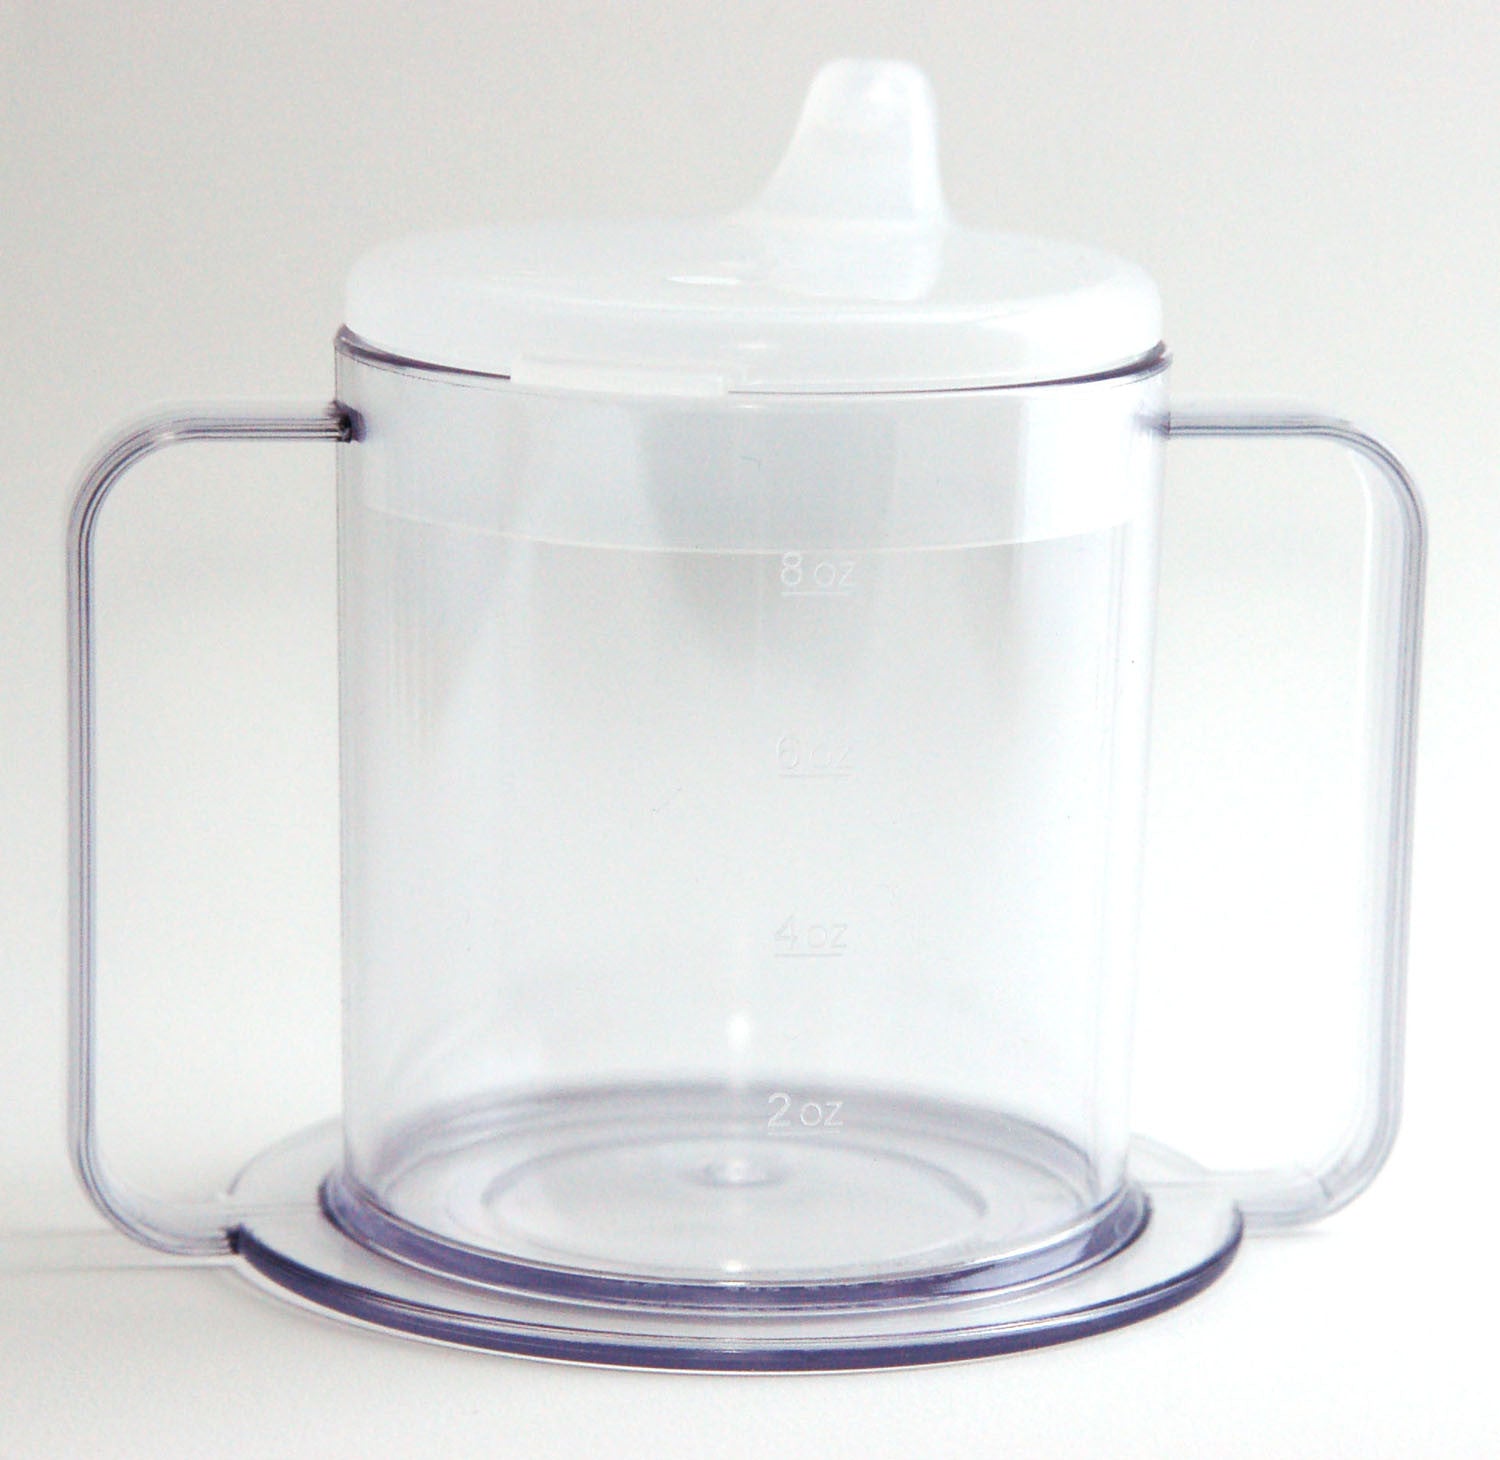 Independence Long Handle Clear Mug with Lids